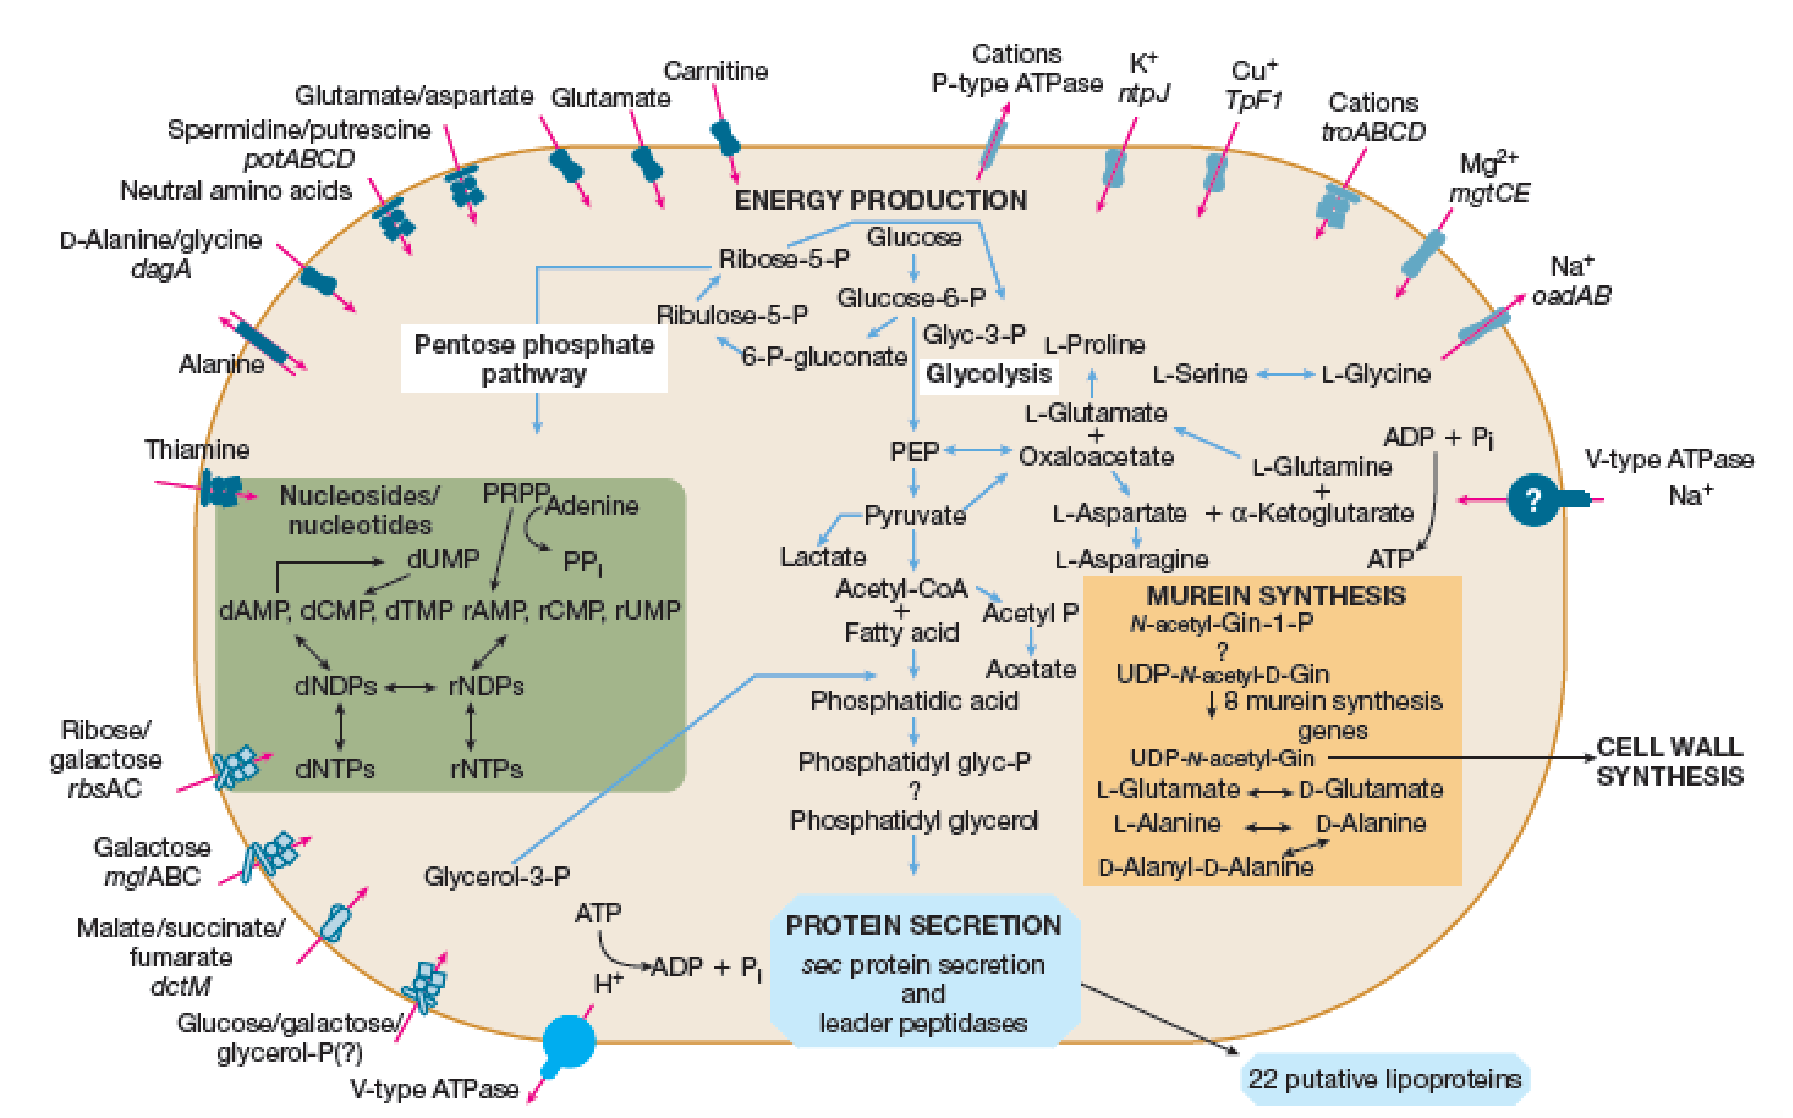 Chapter 18.5, Problem 1MI, Figure 18.12 Metabolic Pathways and Transport Systems of Treponema pallidum. This depicts T. 